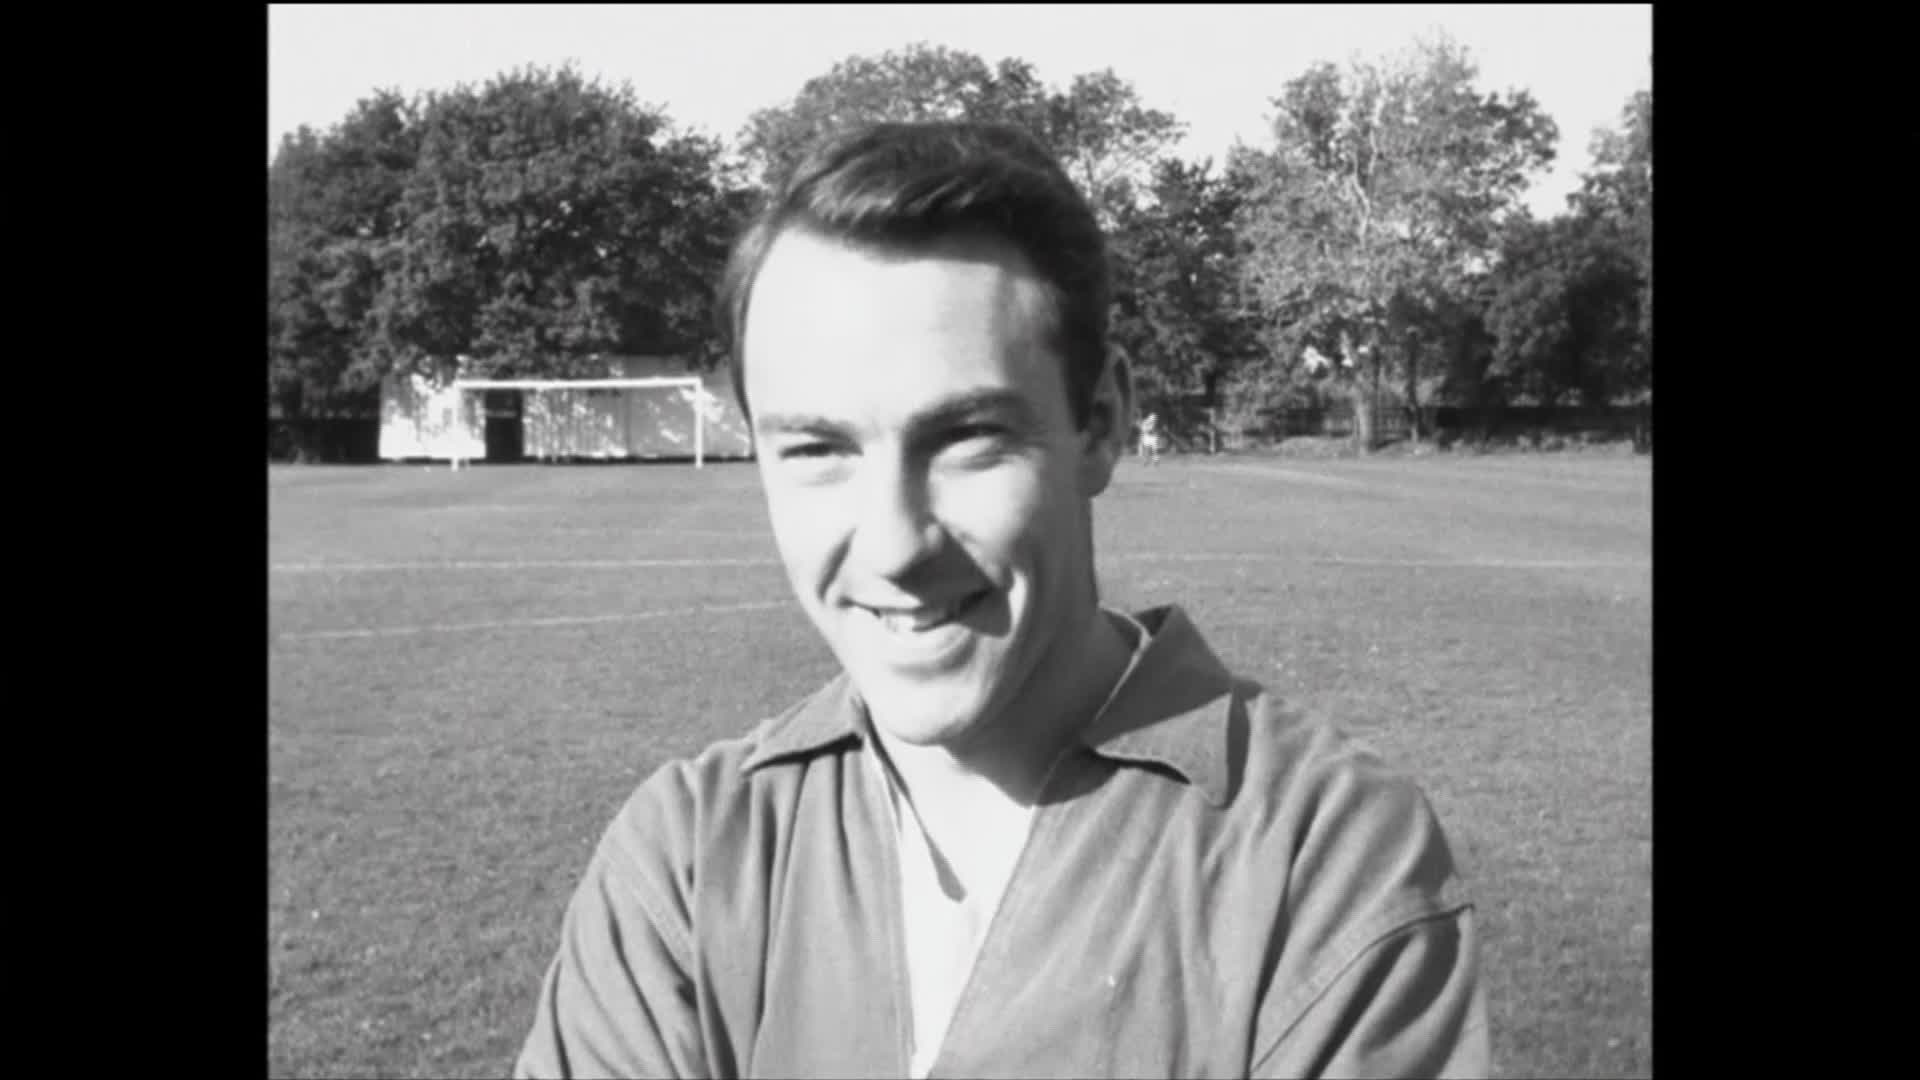 Jimmy Greaves' famous England jersey